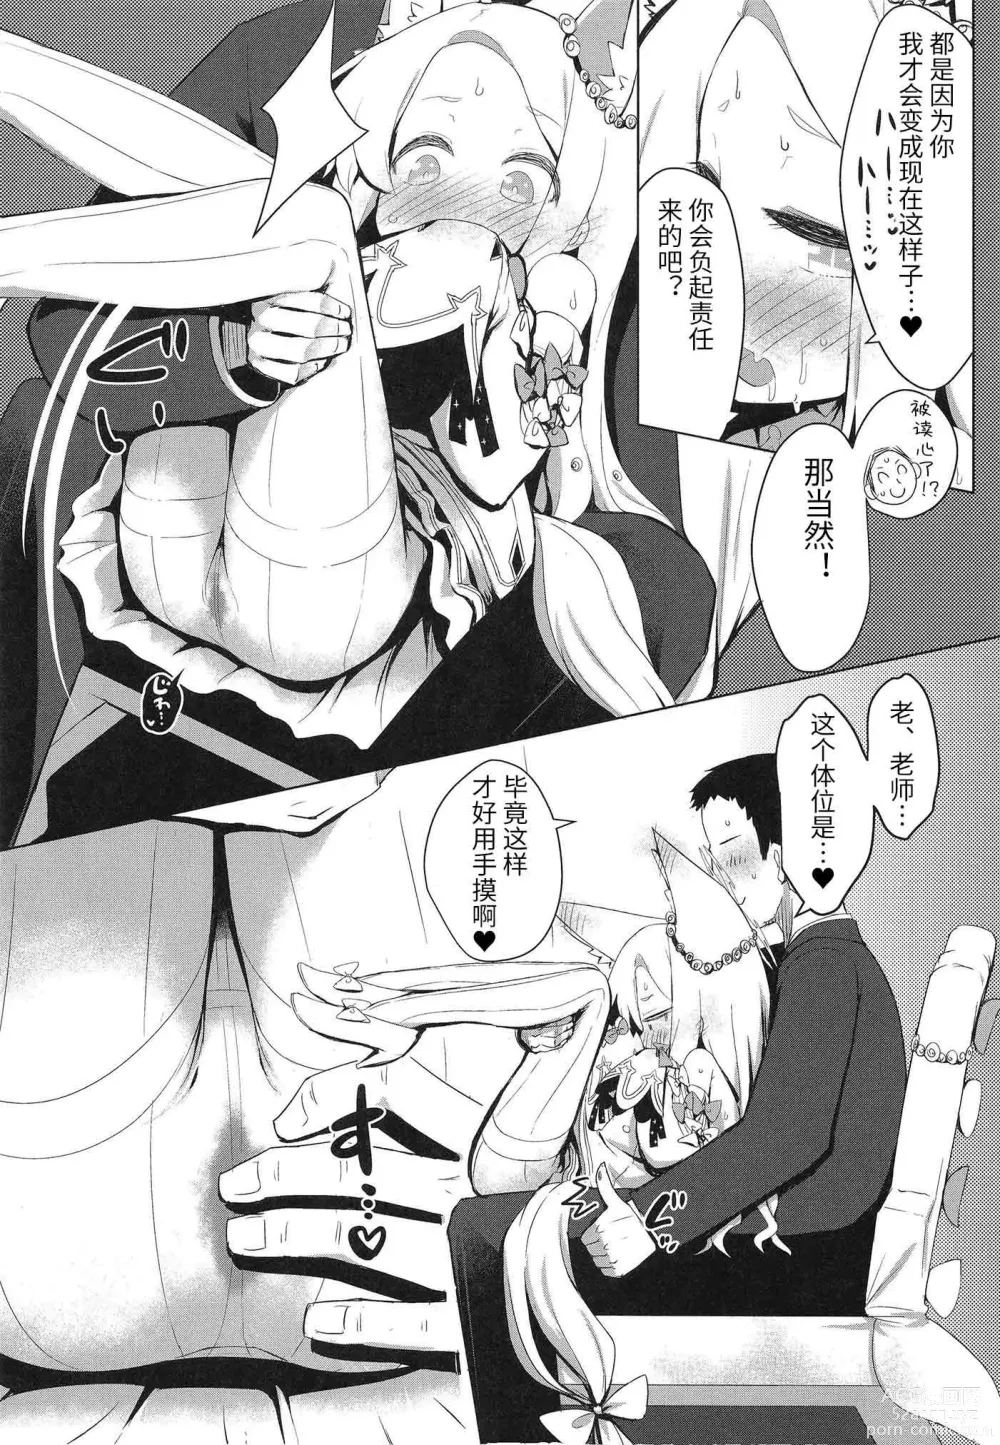 Page 12 of doujinshi 抱歉的发情圣娅